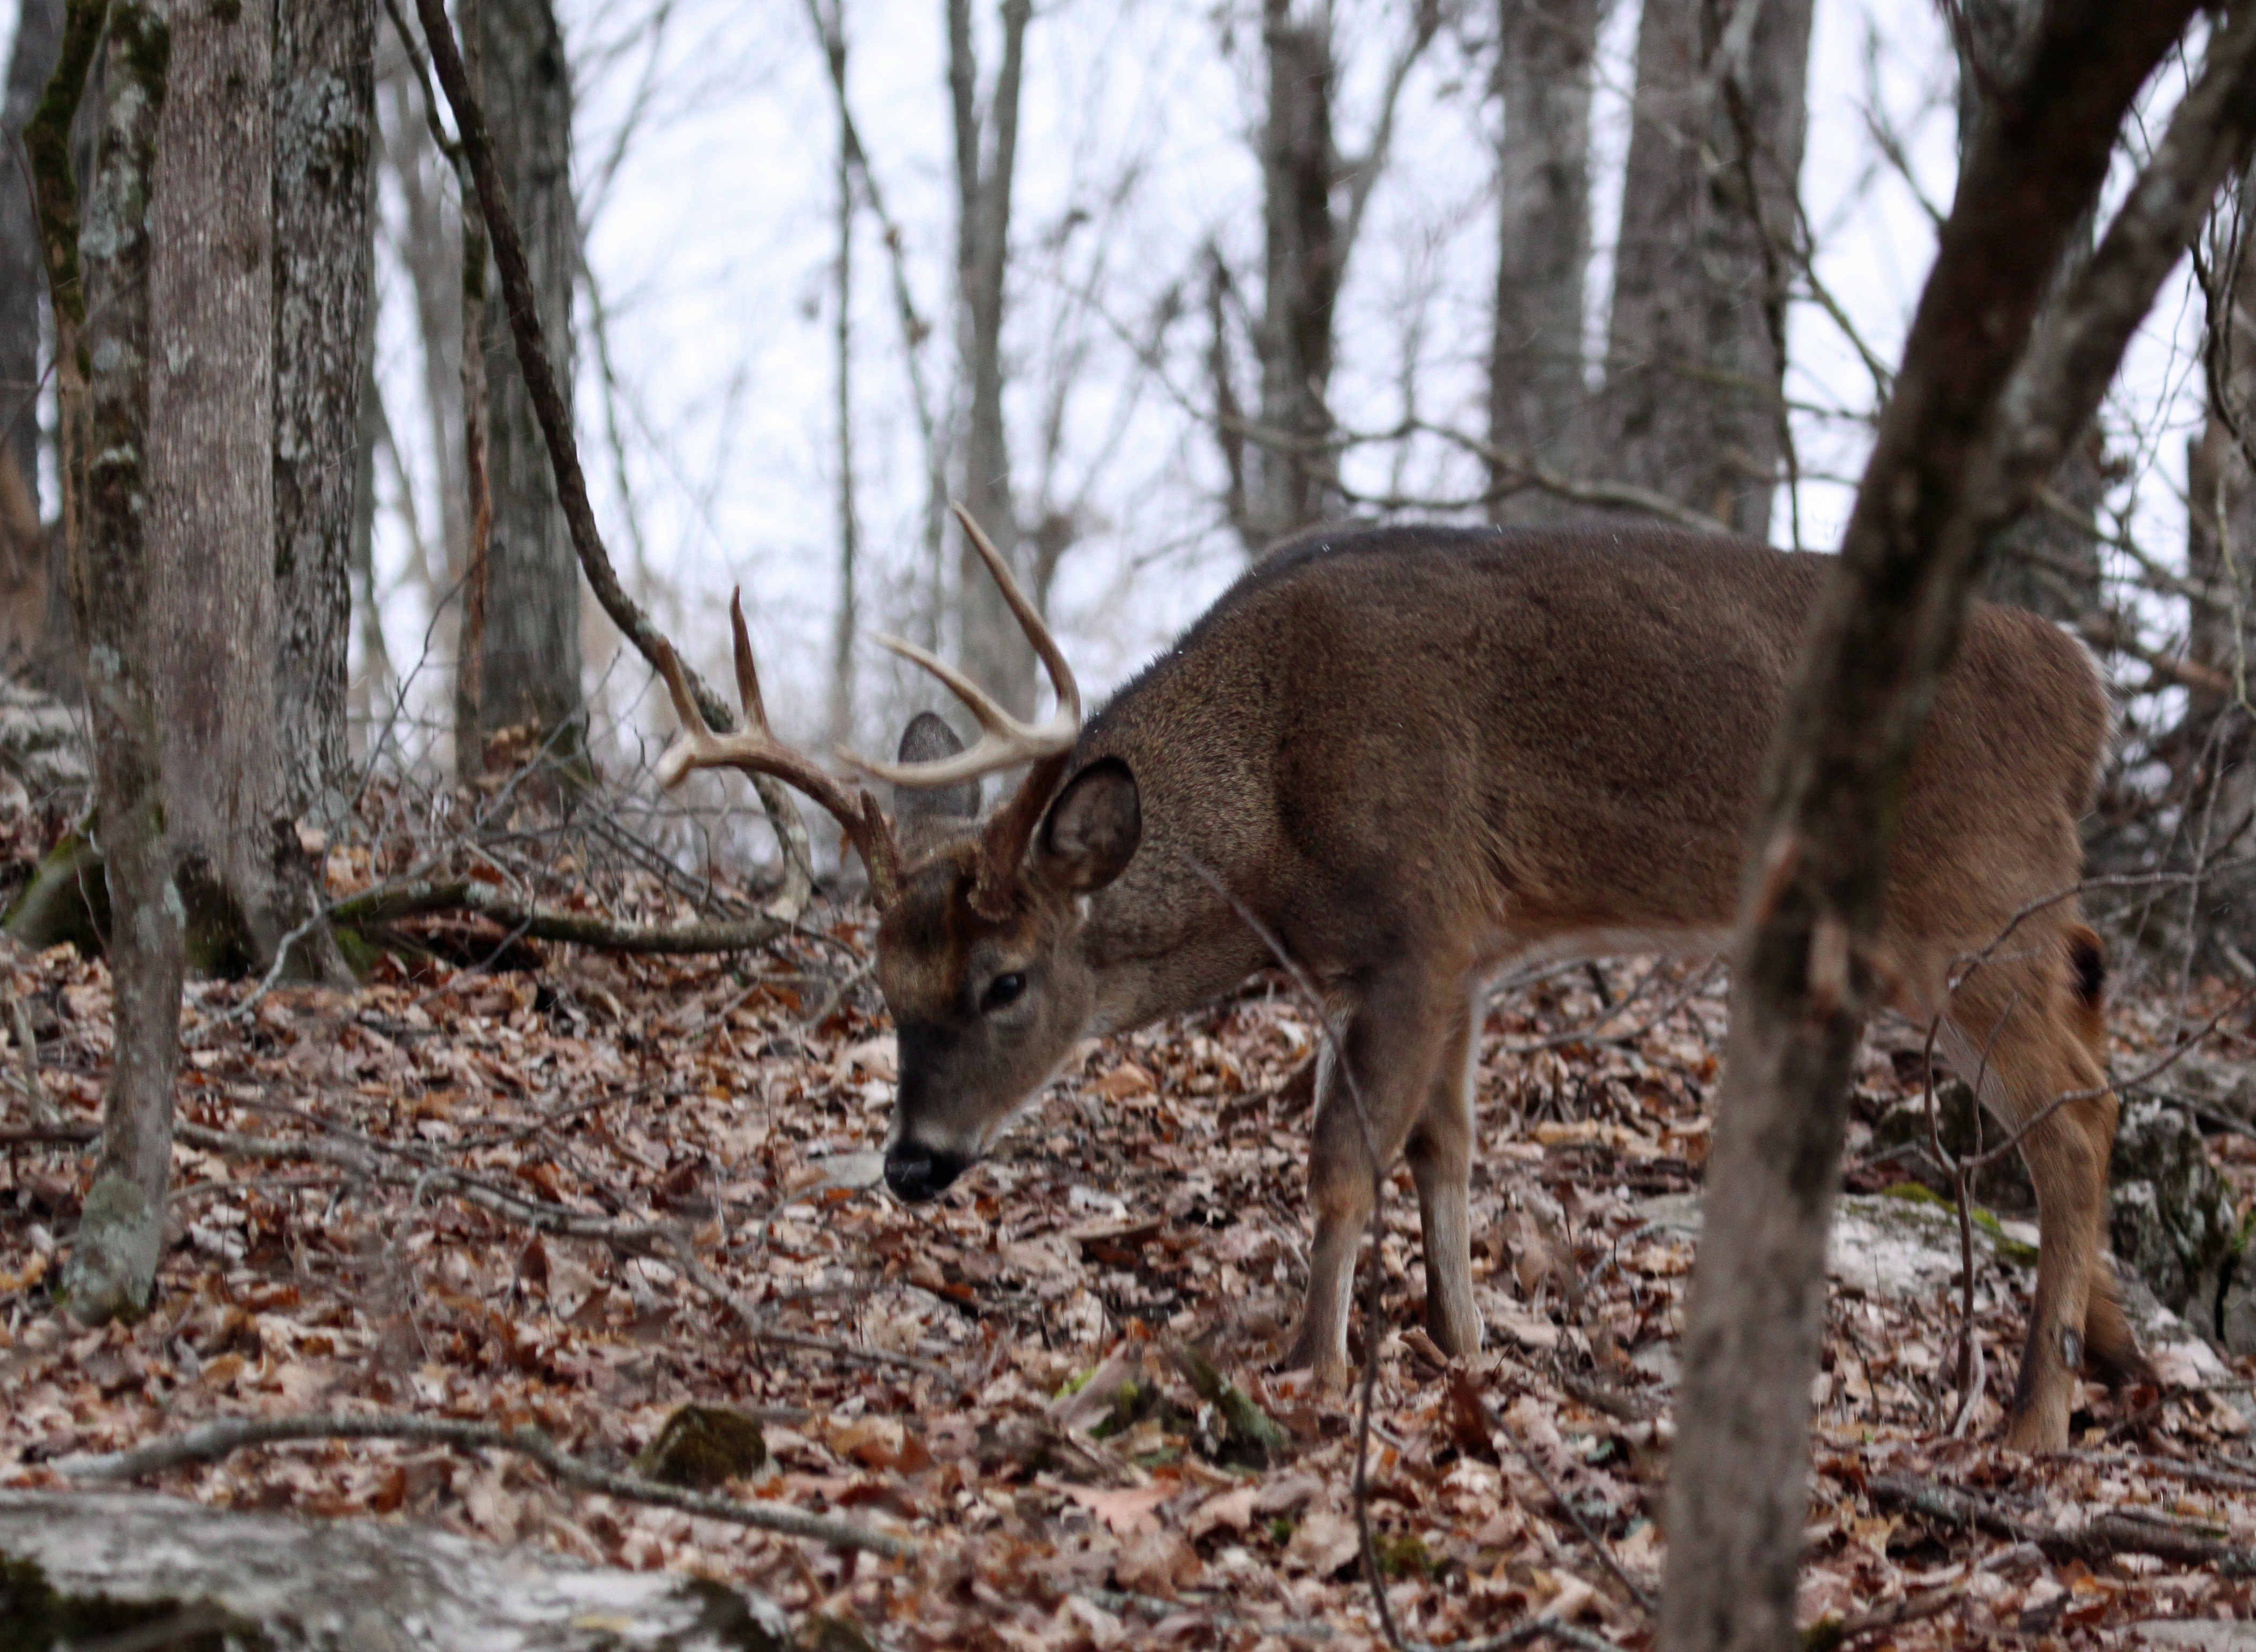 Find some remaining acorns to have success deer hunting late in the season.